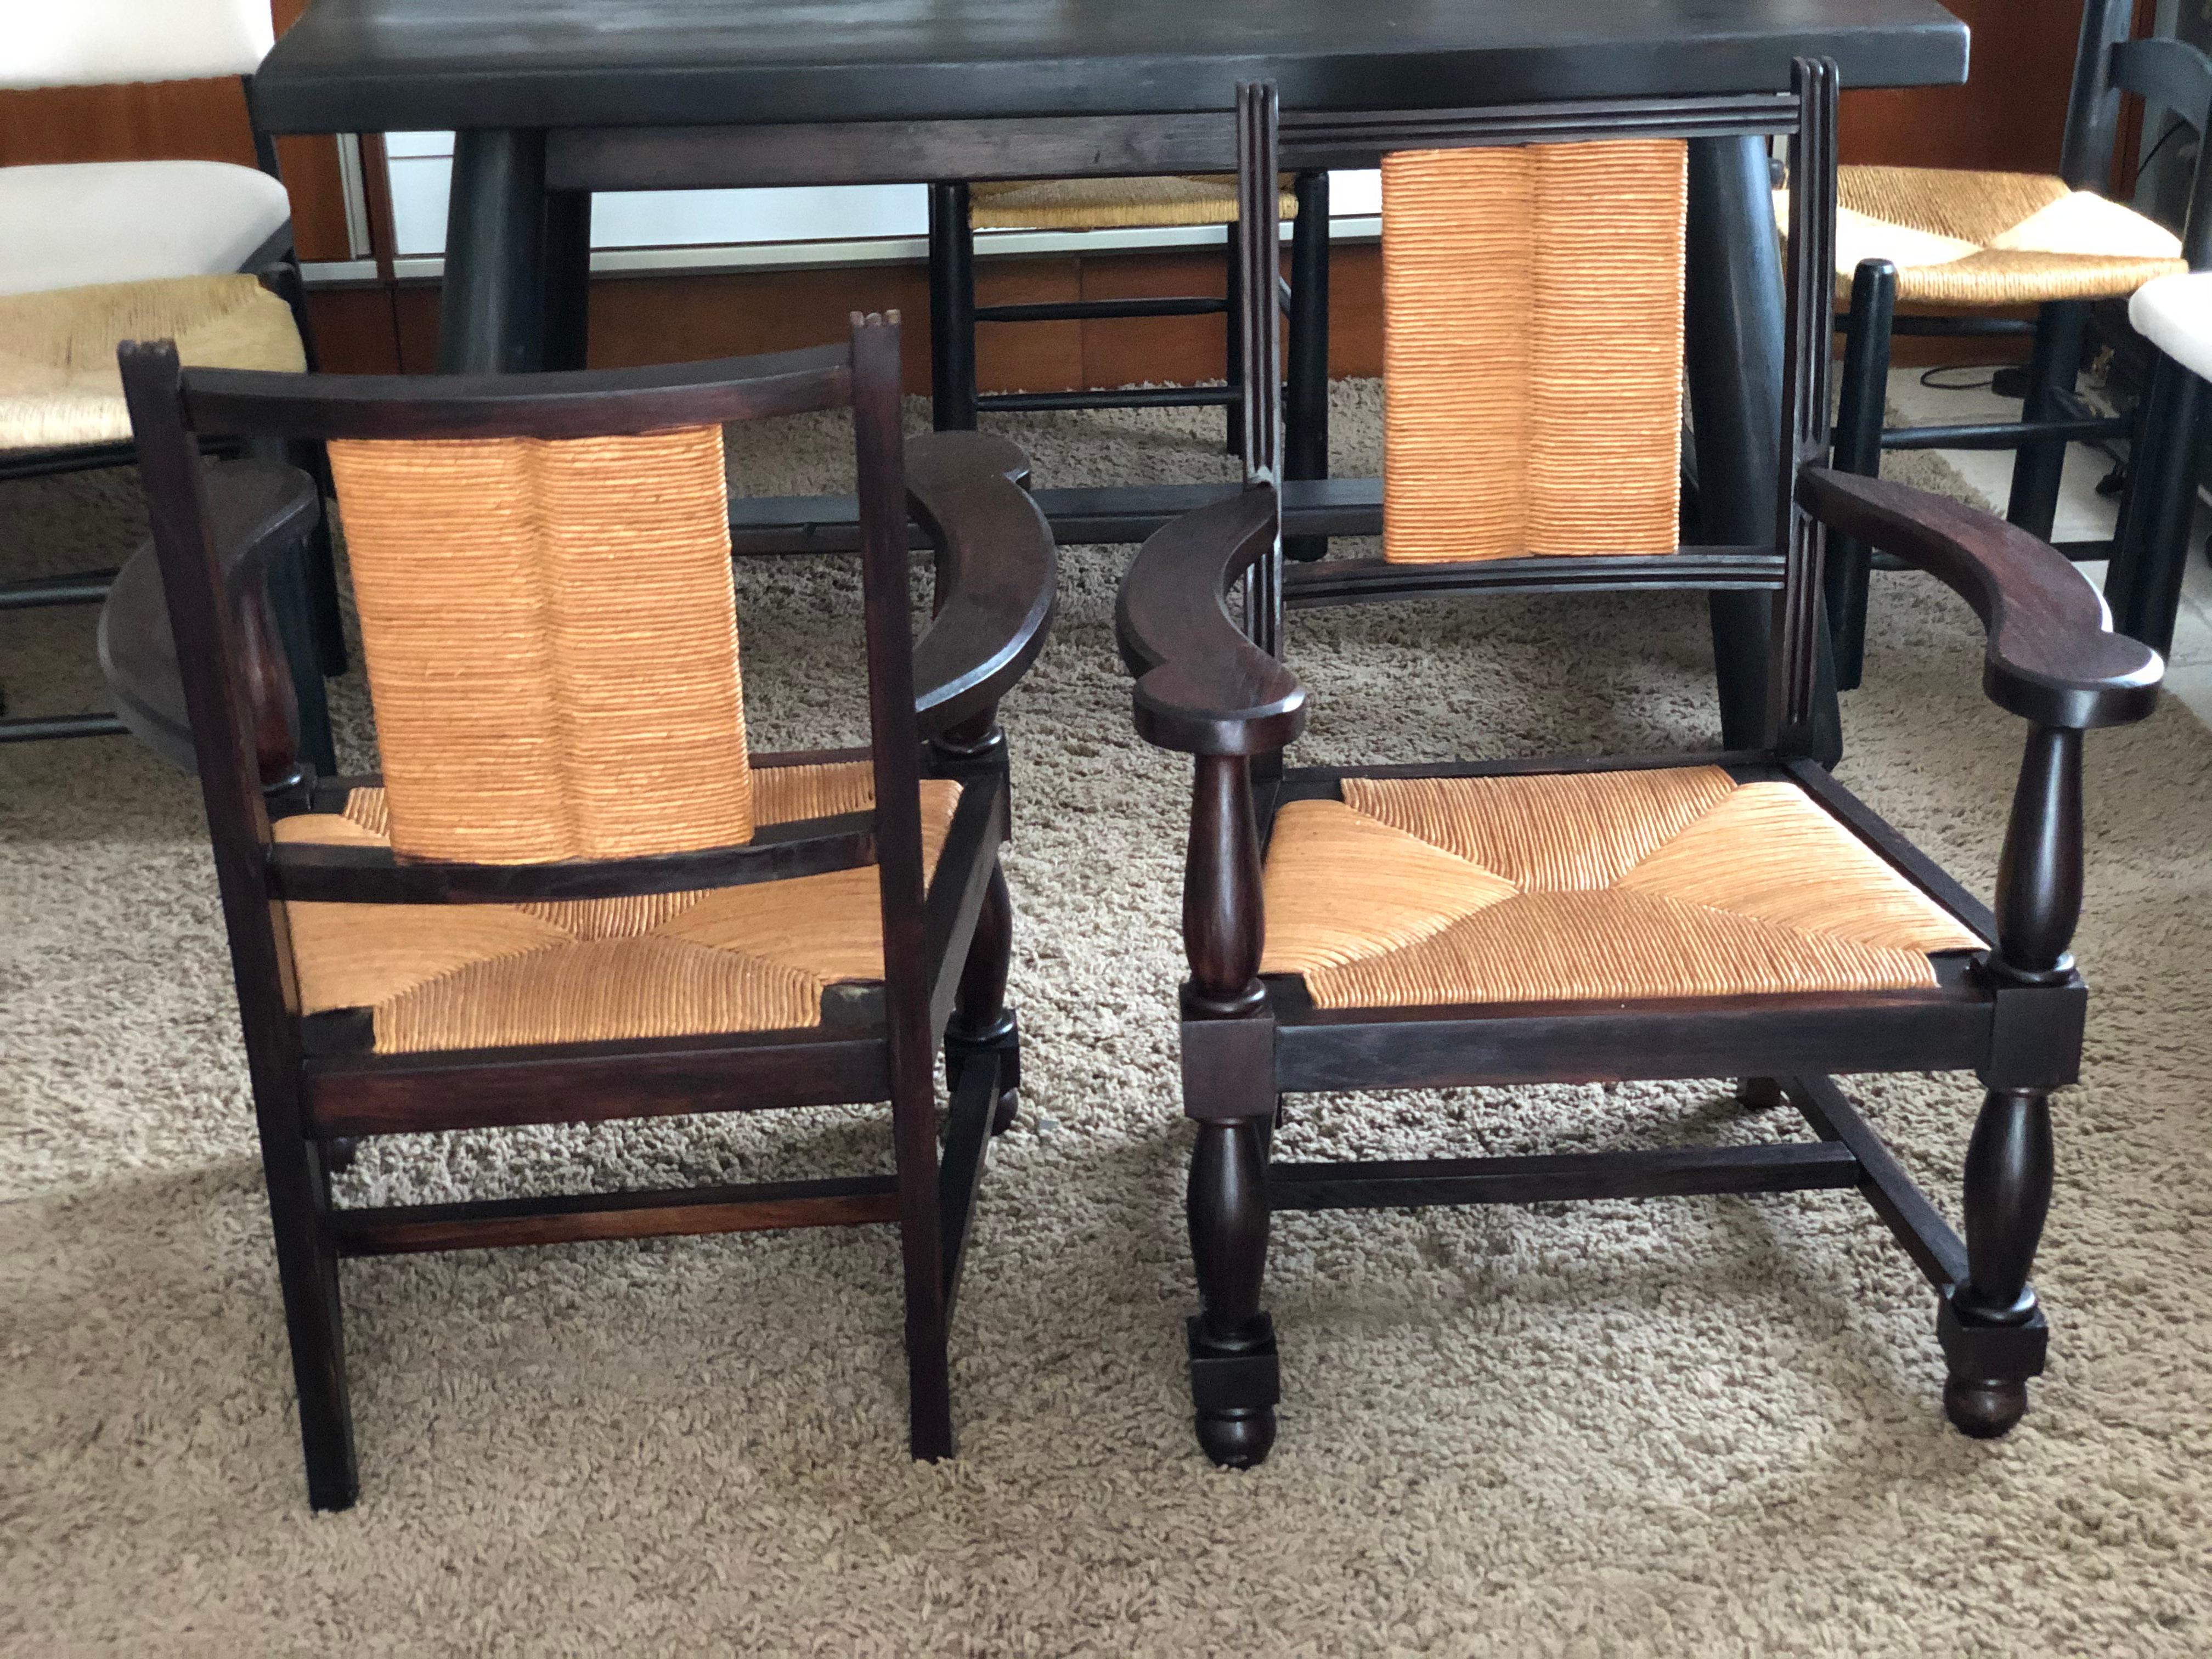 Pair of 1950s neo-basque vintage oak armchairs, straw-covered seats and backs. Fully restored. Dimensions: Height: 83 cm. Width: 53 cm. Depth: 63 cm.